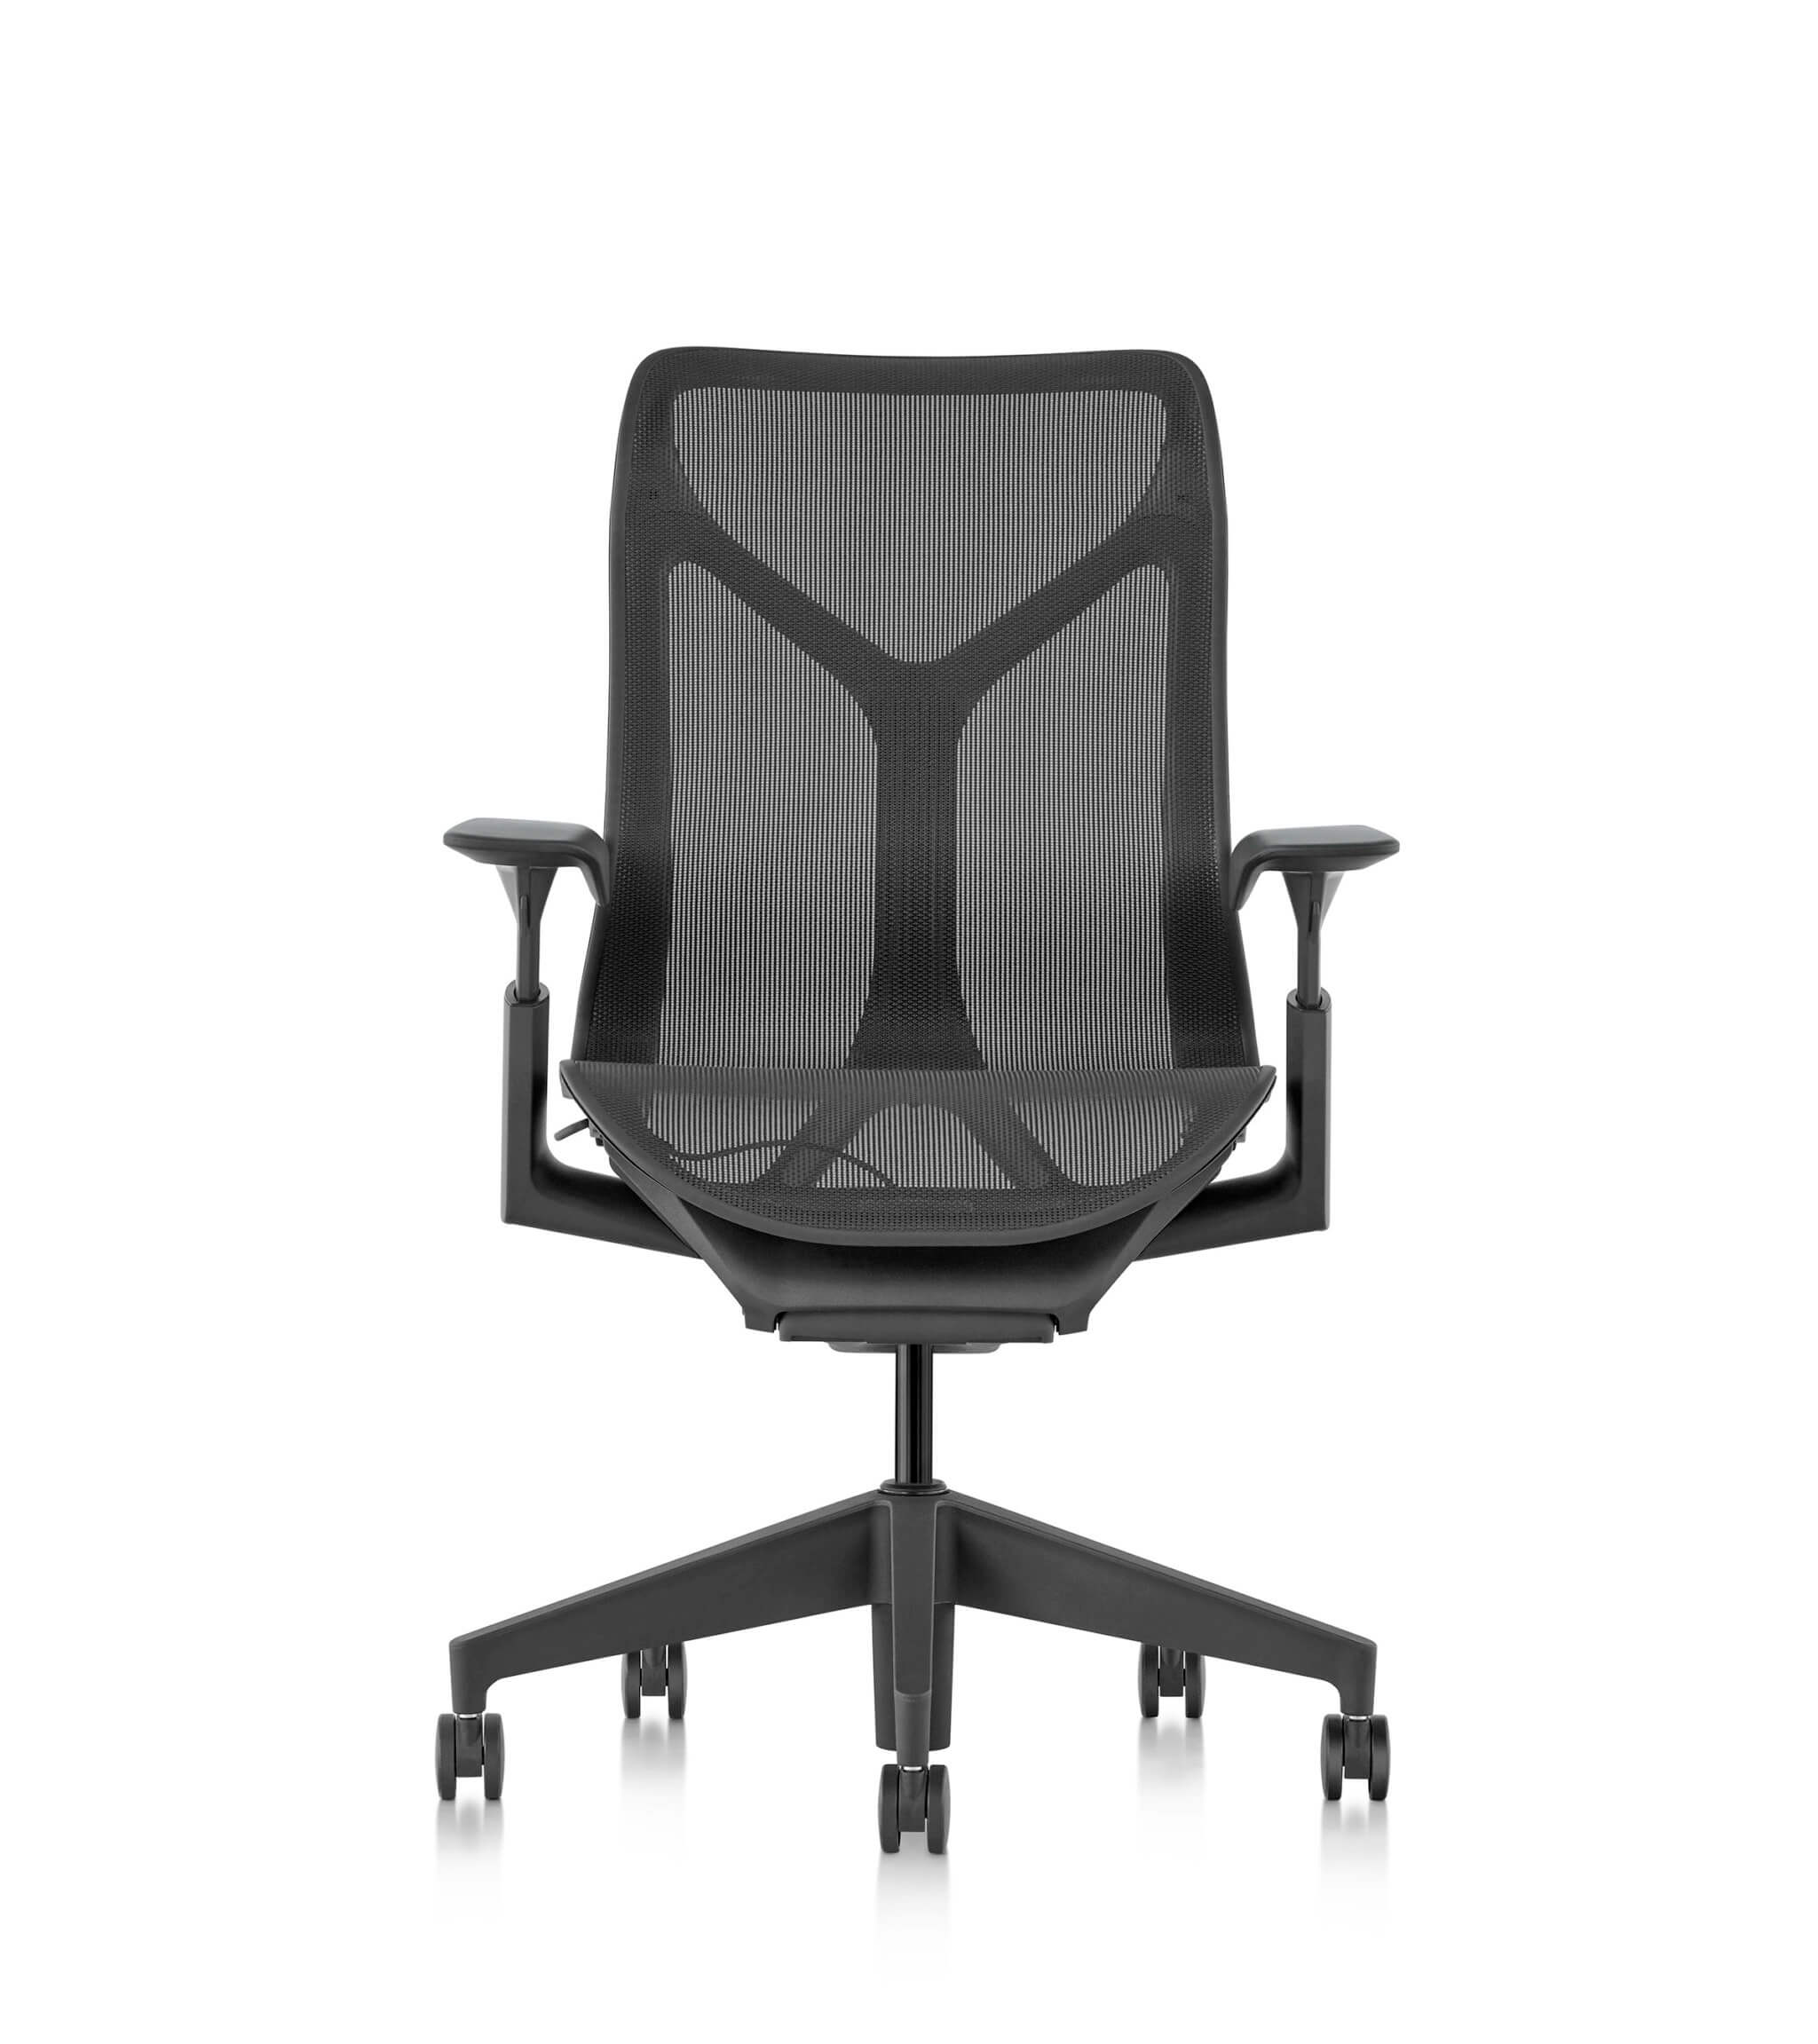 cosm chair by Herman miller on black colour front view in a white background